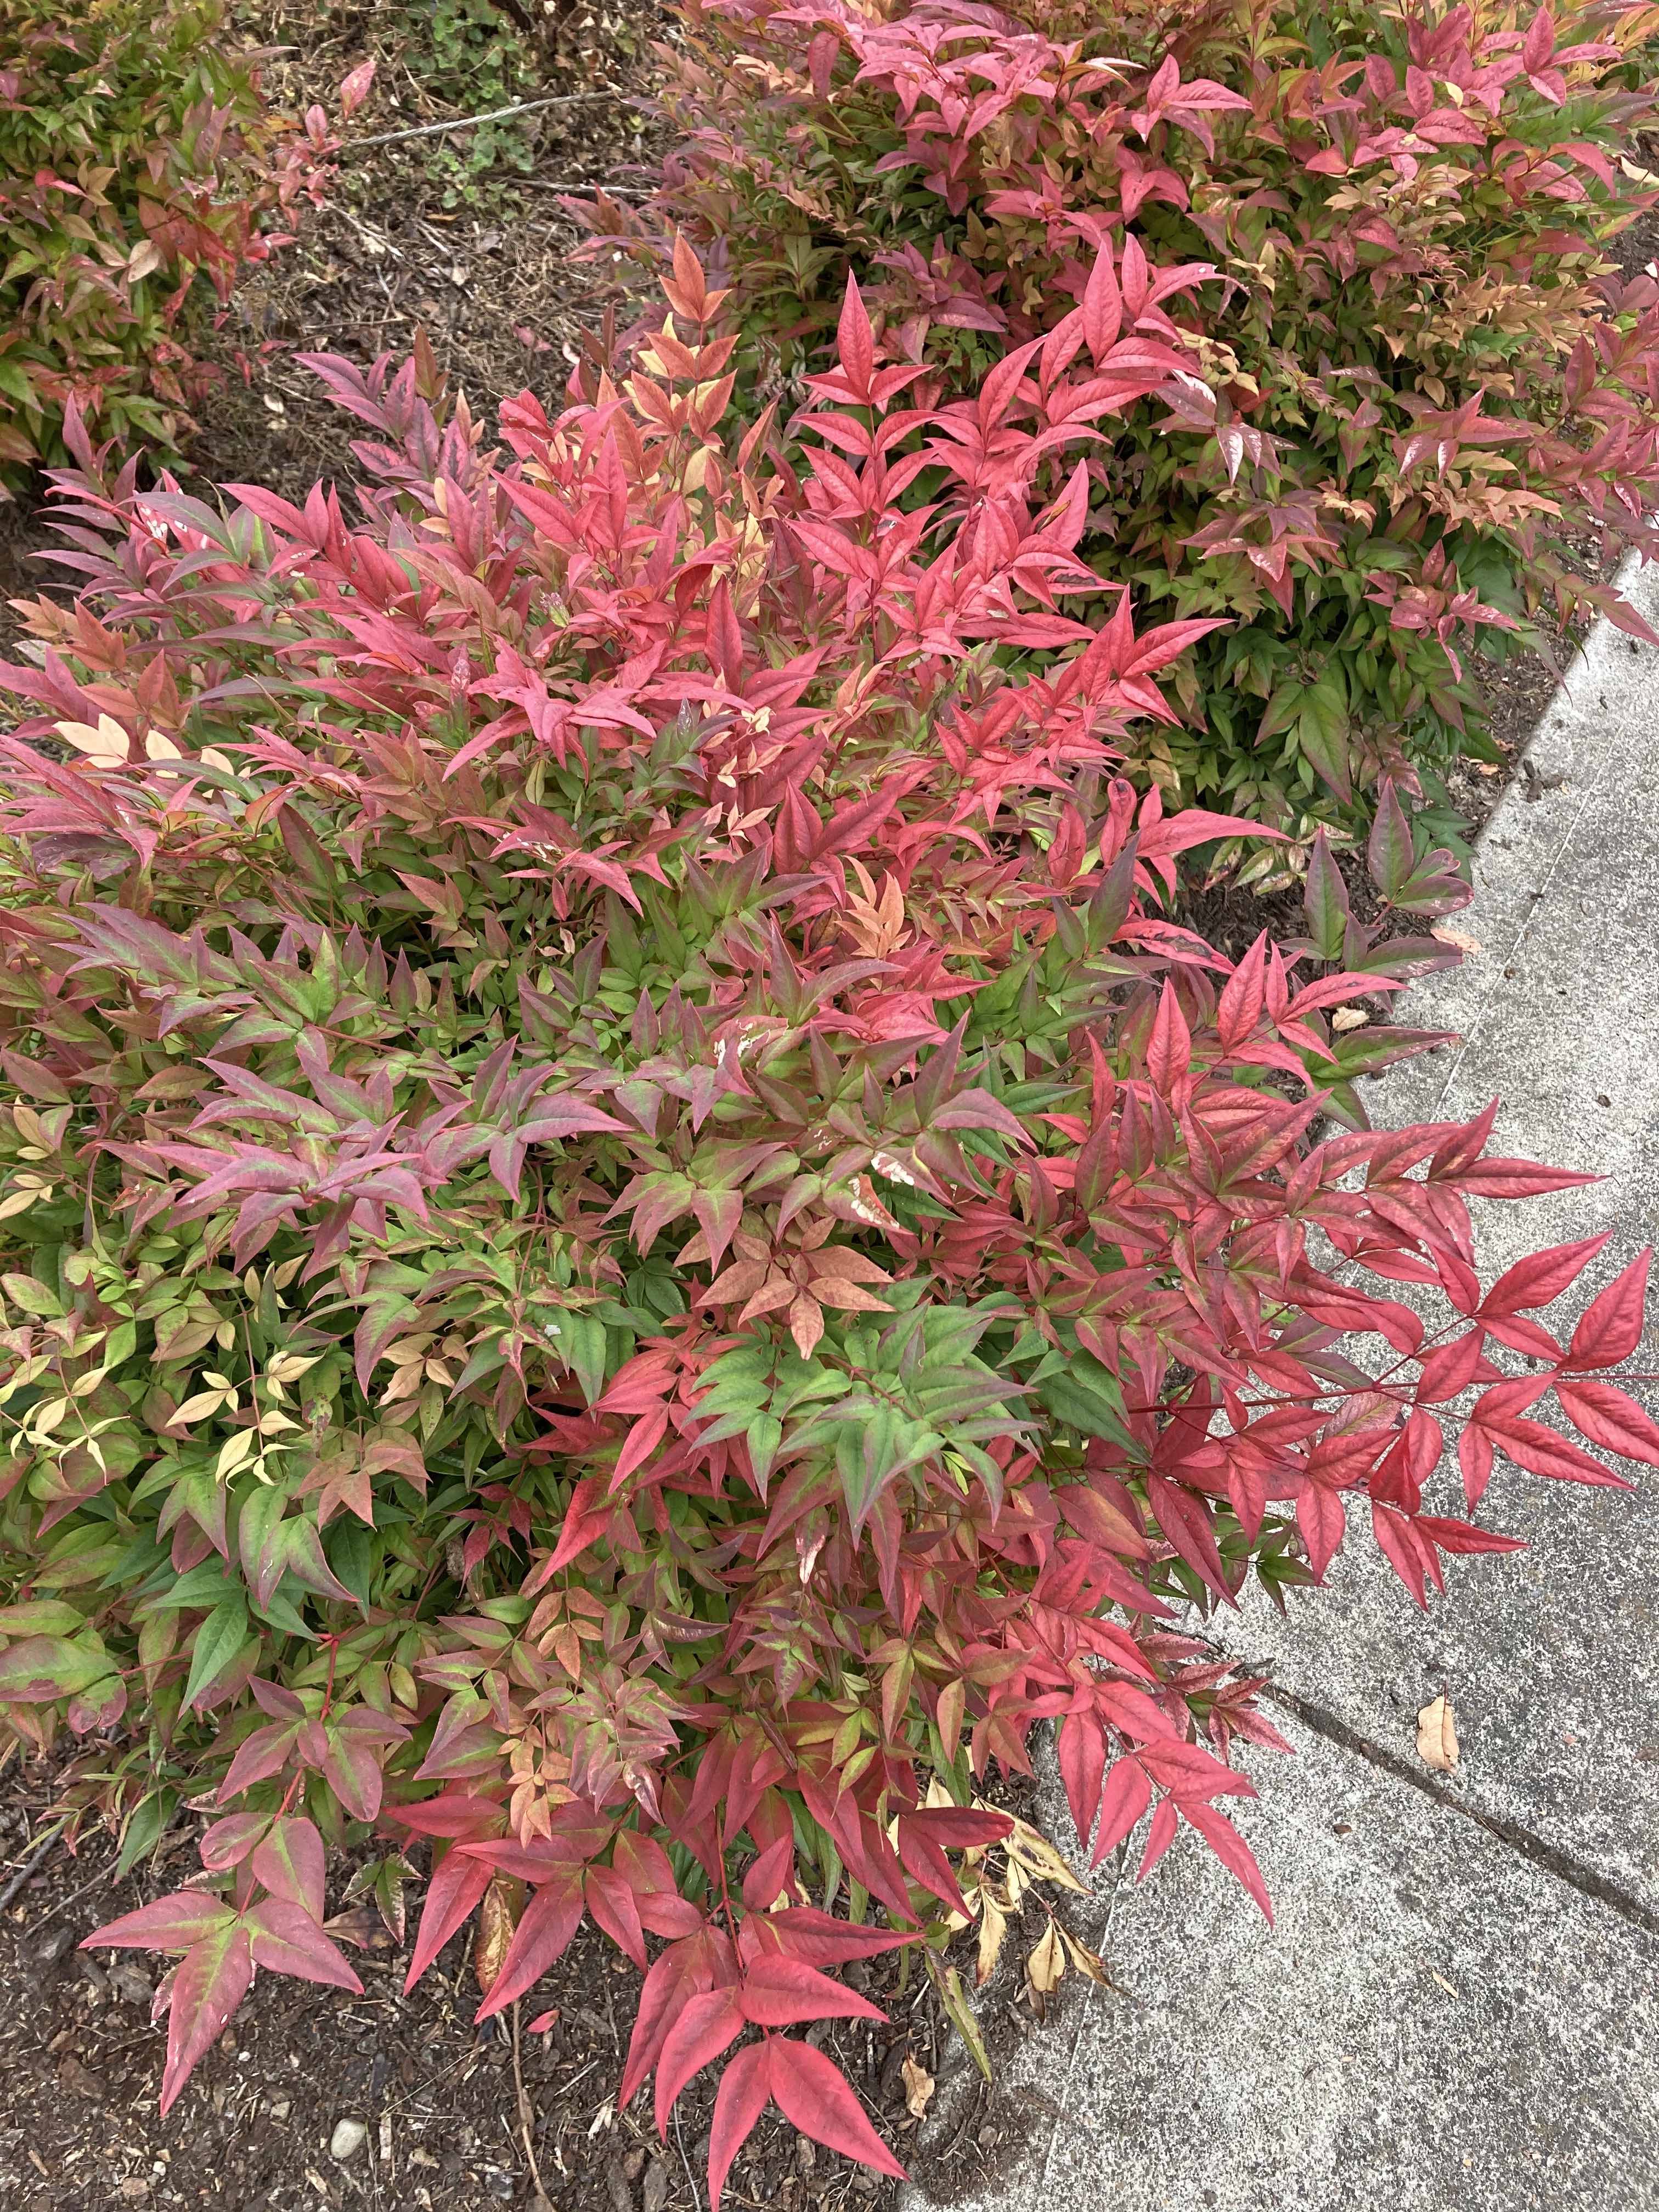 Nandina 'Firepower' is recommended by Bruce Hegna of Nature/Nurture Landscape Design.